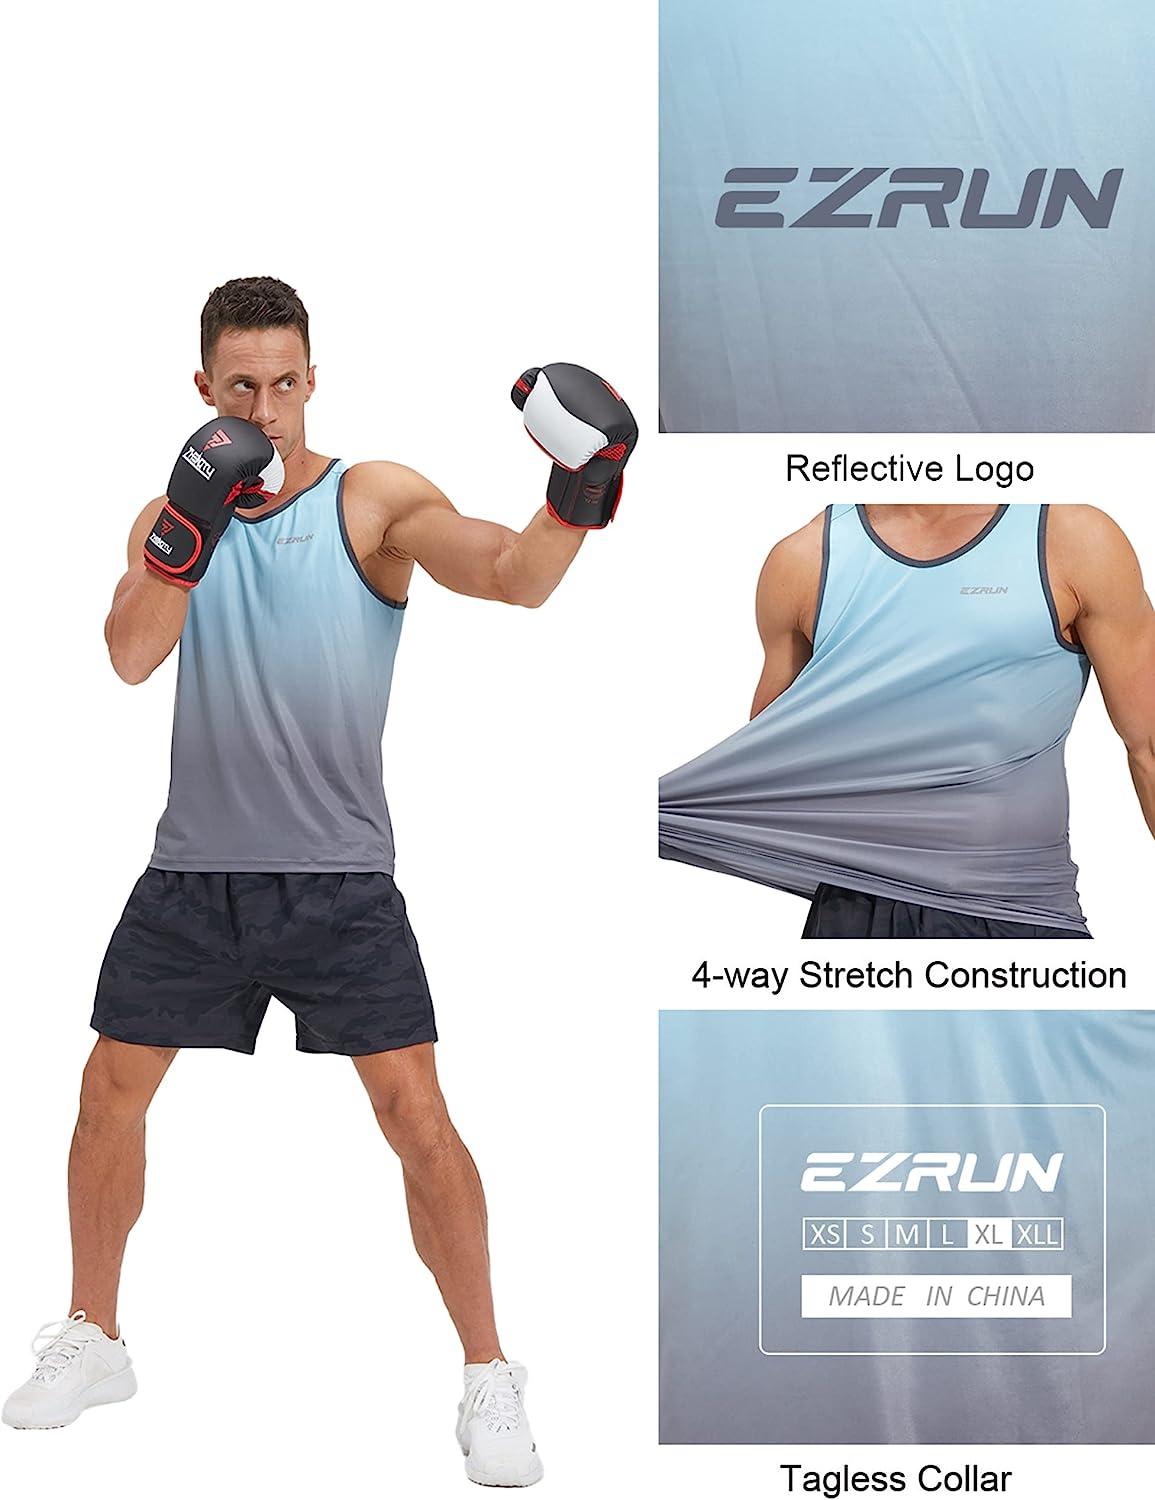  Men's Gym Body Building Sports Running Workout